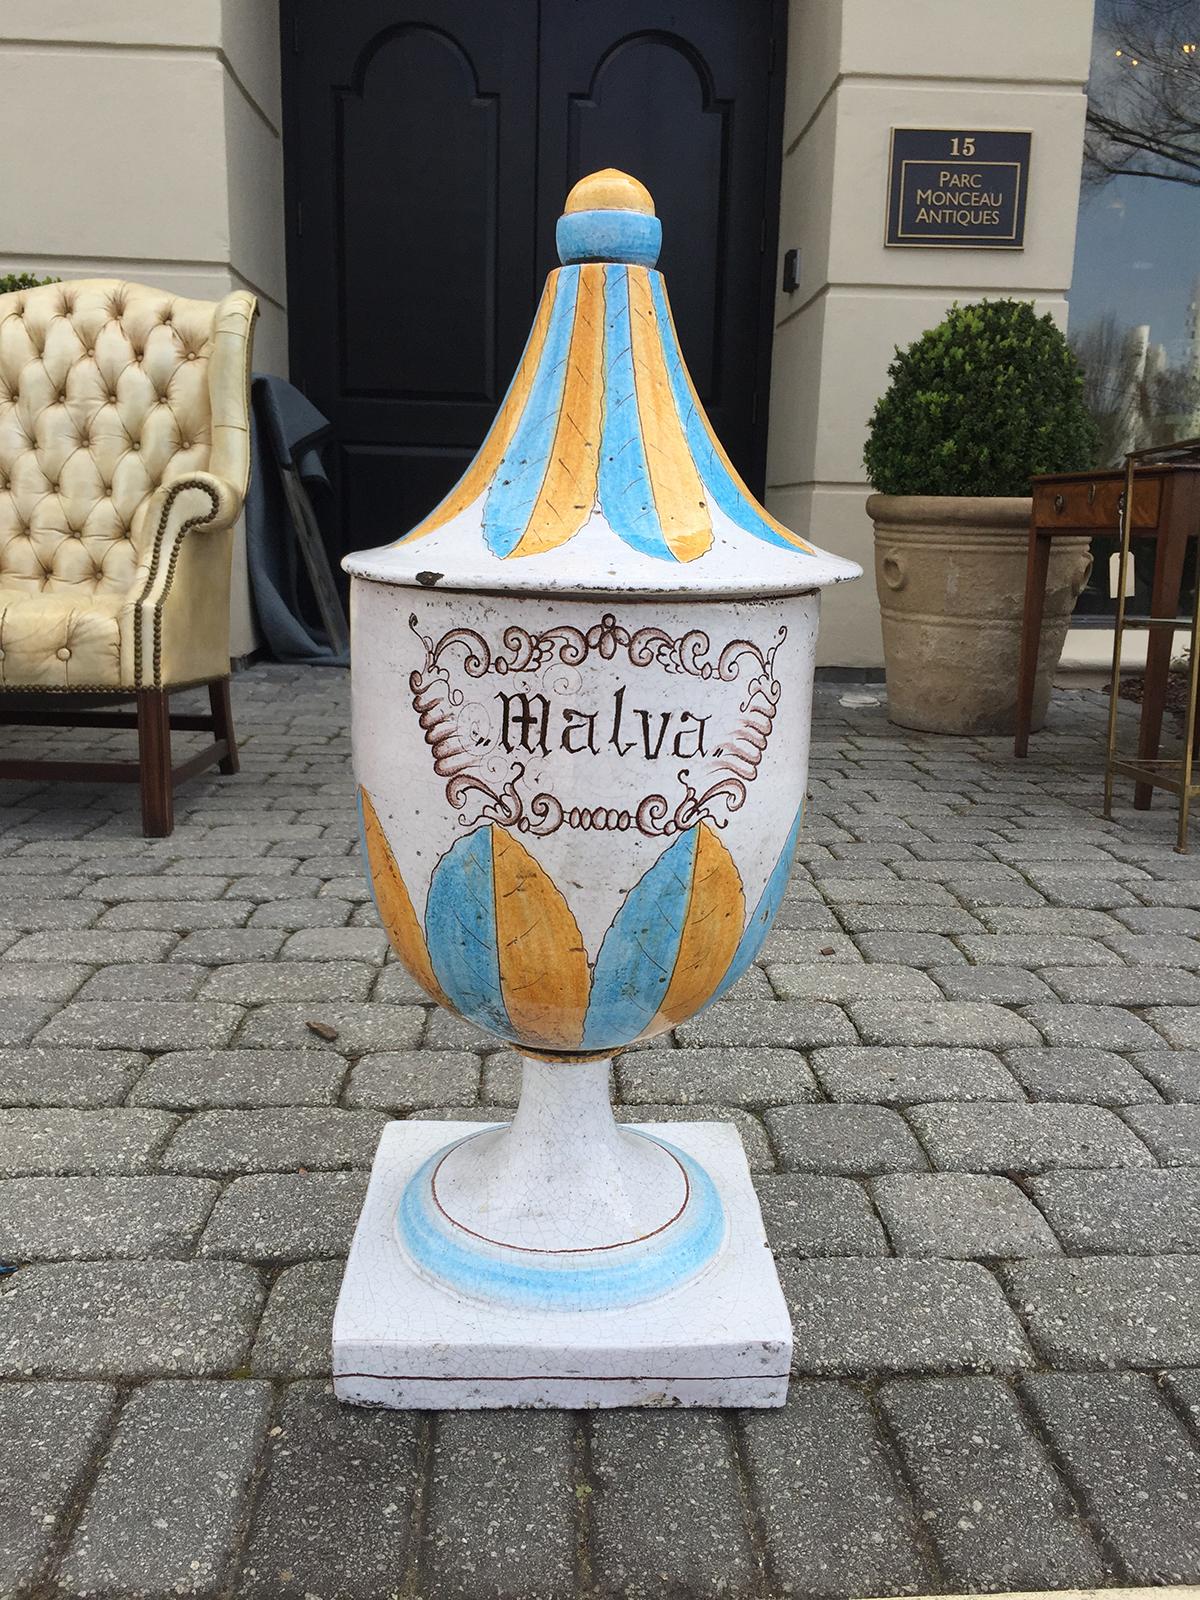 Large scale 20th century Italian glazed ceramic blue and yellow lidded urn labeled 